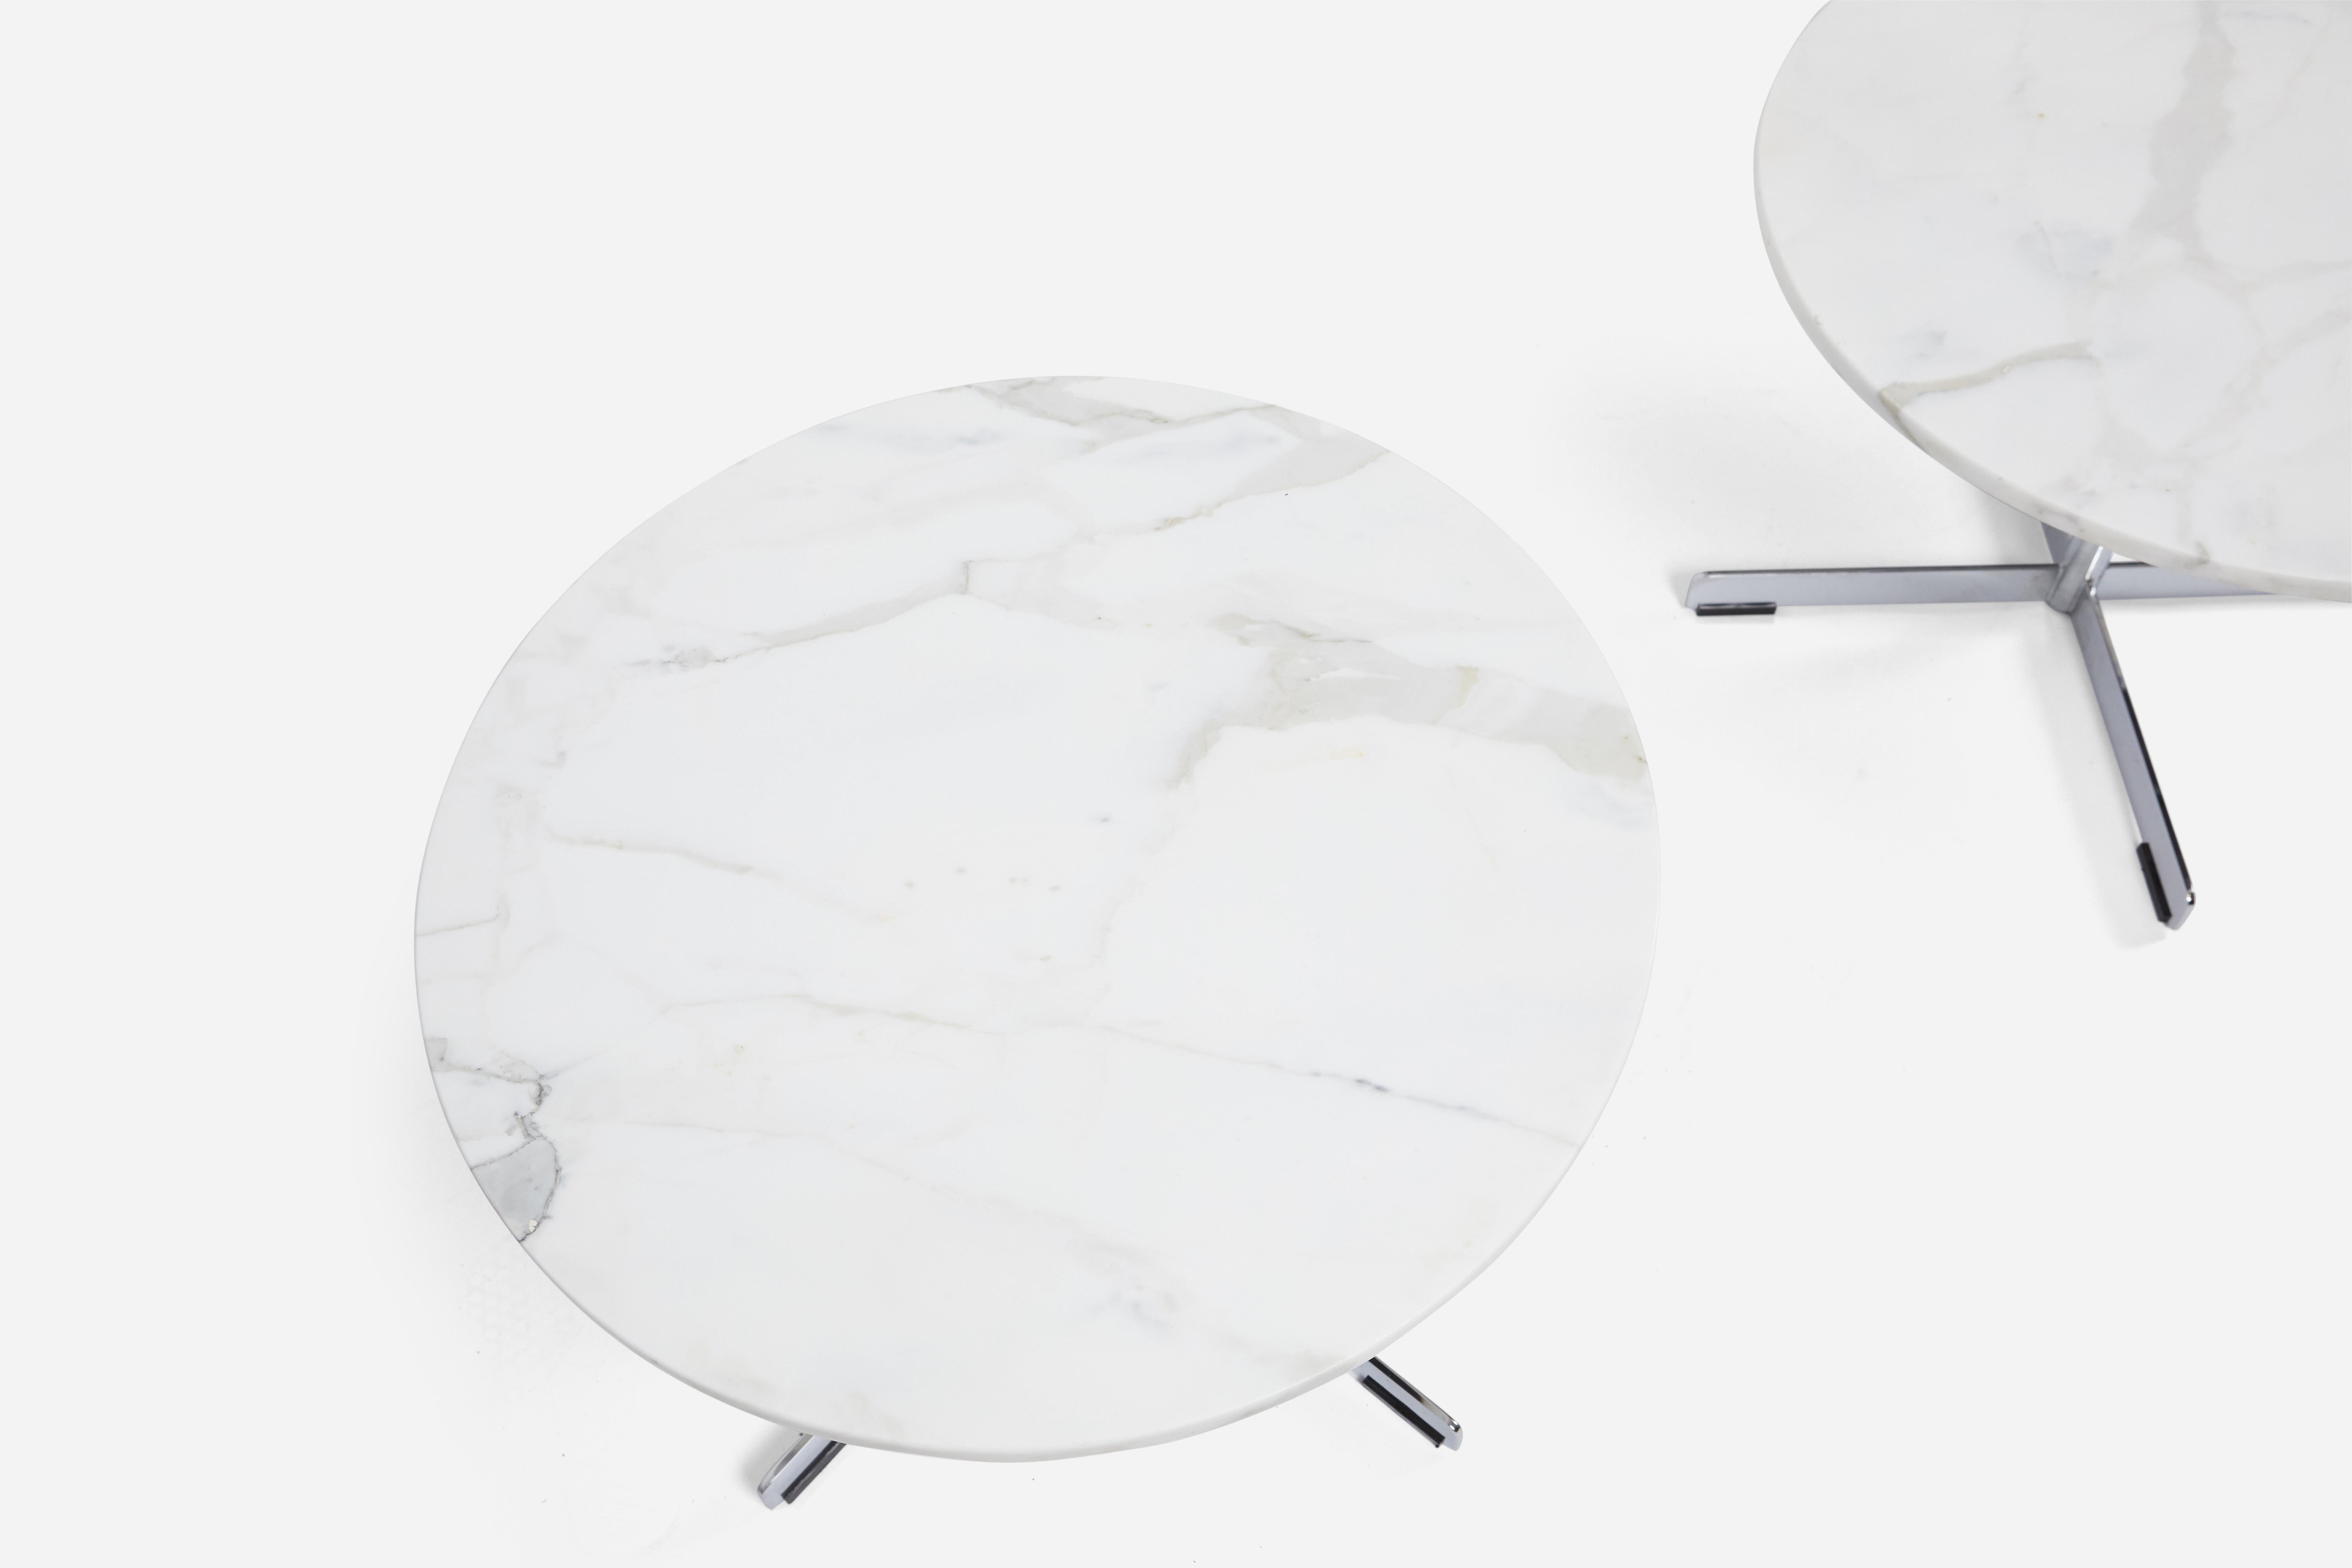 Pair of architectural round side tables, circa 1960. White marble tops on stainless steel tripod bases.